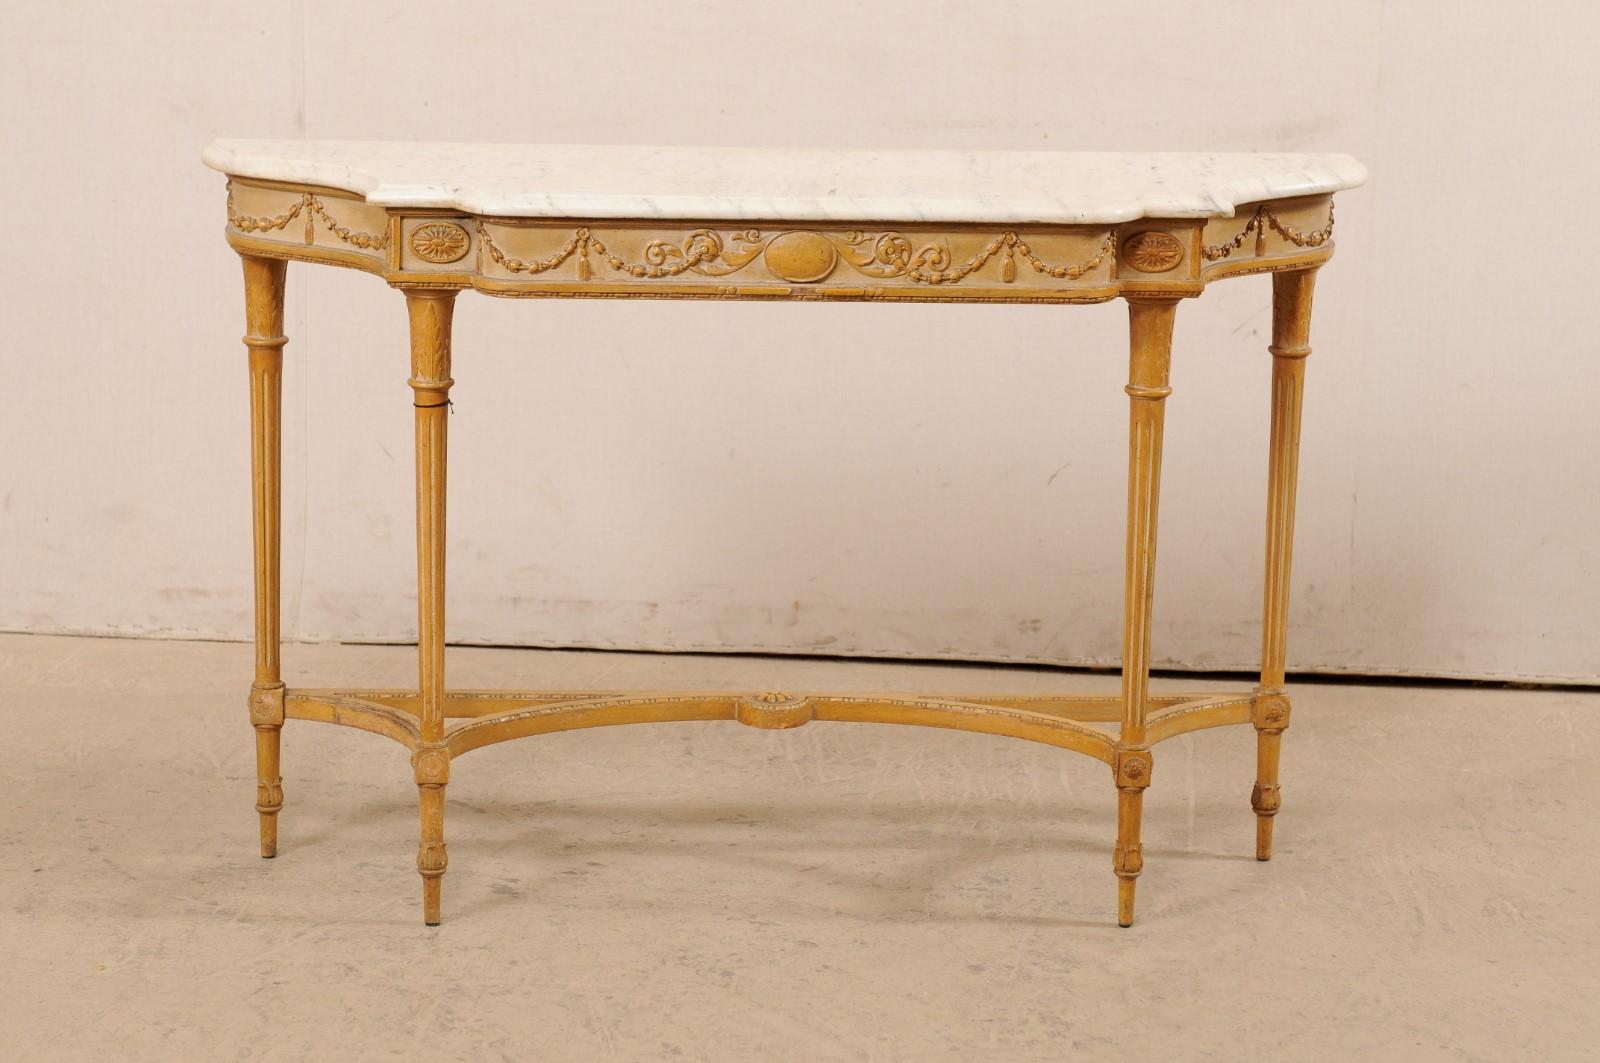 A French carved-wood console table with marble top from the mid 20th century. This vintage table from France has been designed with Neoclassical influences, and features a marble top which rests upon an apron carved with stringing garlands and an